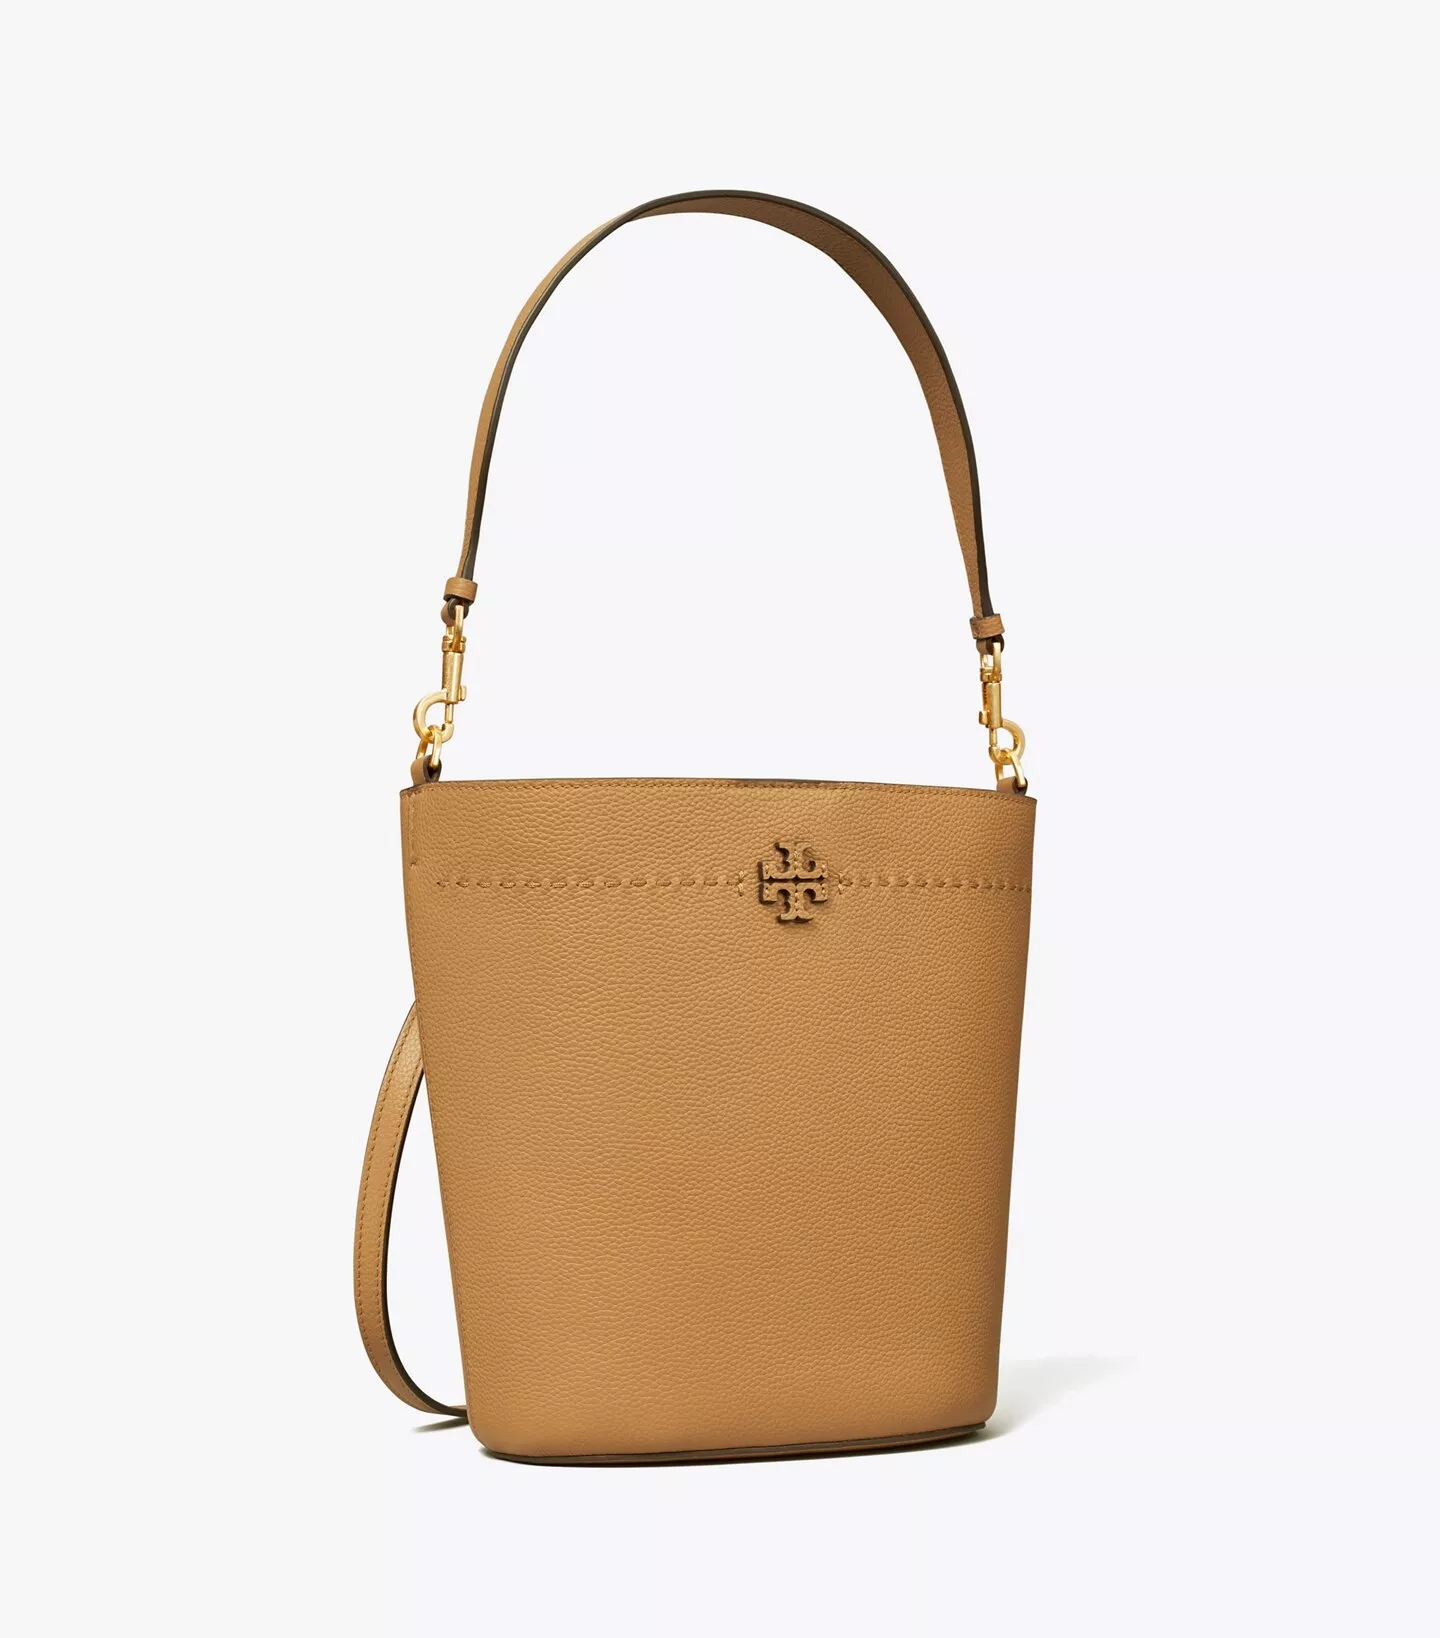 Tory Burch Lee Radziwill Petite Bag curated on LTK